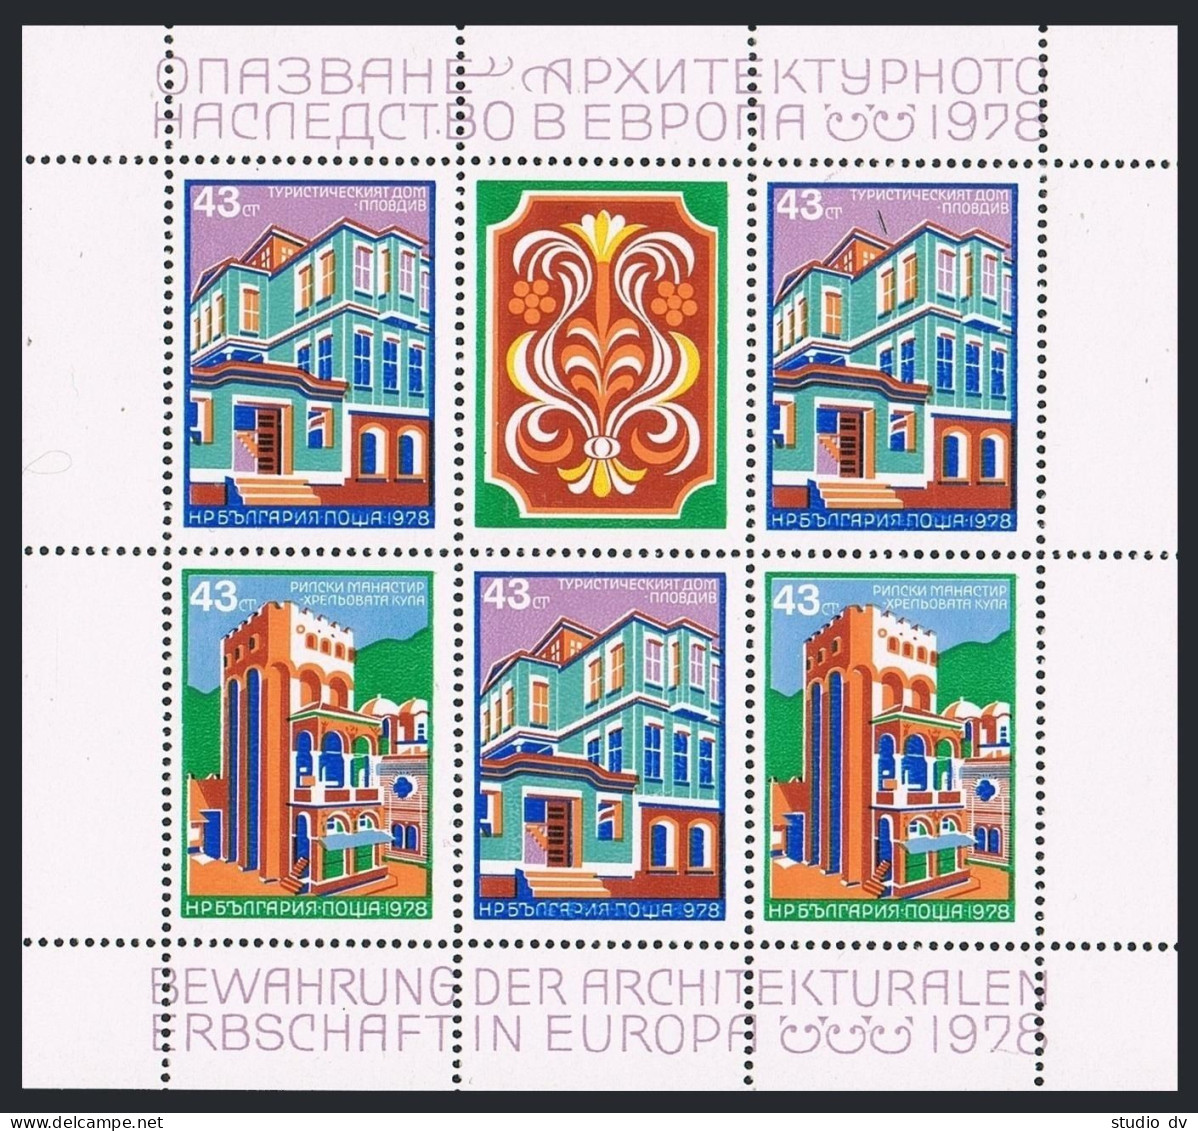 Bulgaria 2541 Sheet, MNH. Mi Bl.80. Conservation Of Architectural Heritage, 1978 - Unused Stamps